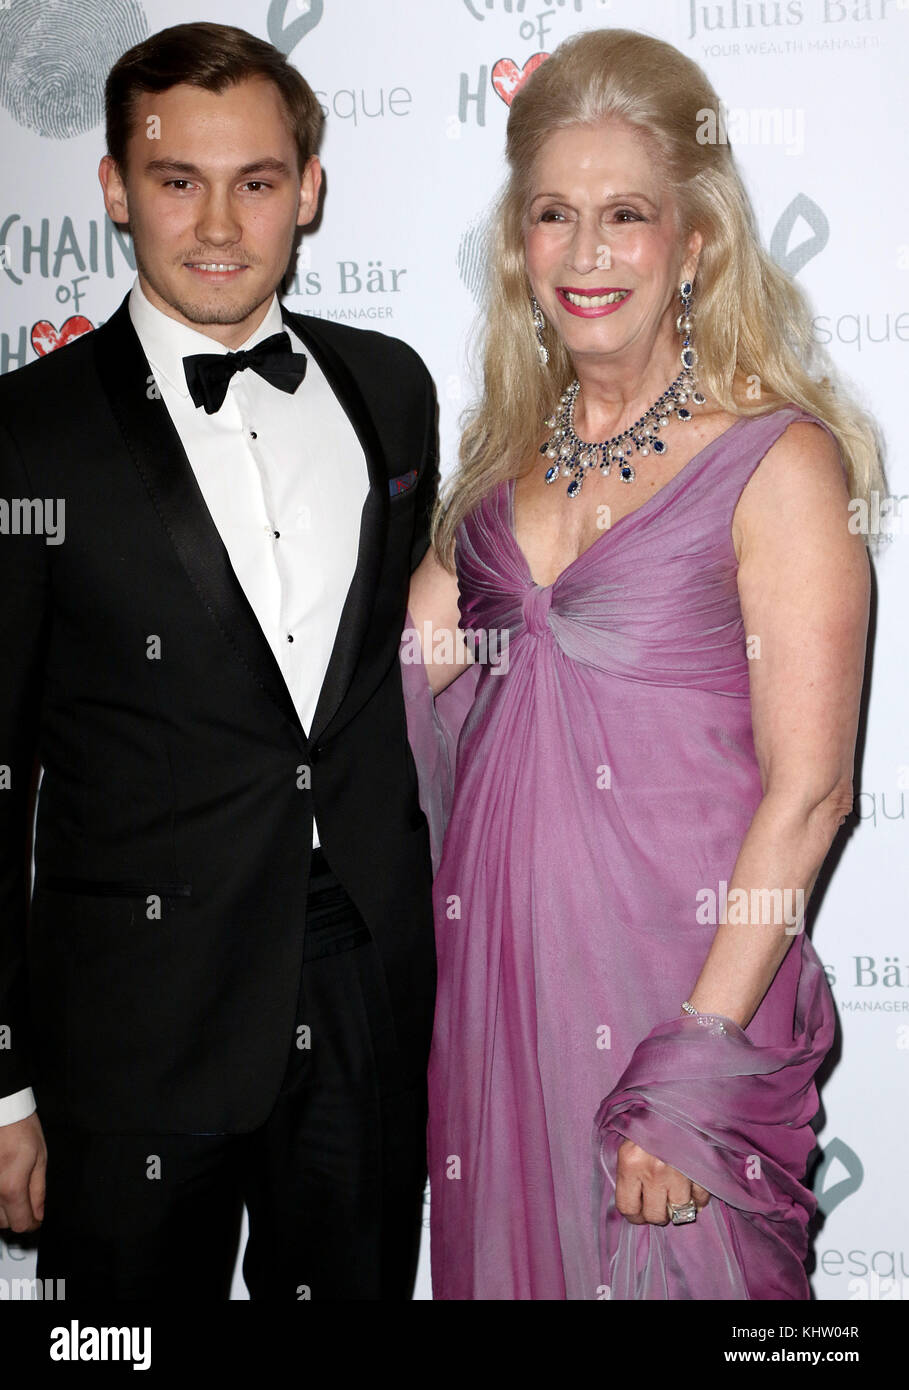 Nov 17, 2017 - Georgia Arianna, Lady Colin Campbell and son Dima Ziadie attending Chain Of Hope Gala Ball 2007, Grosvenor House in London, England, UK Stock Photo